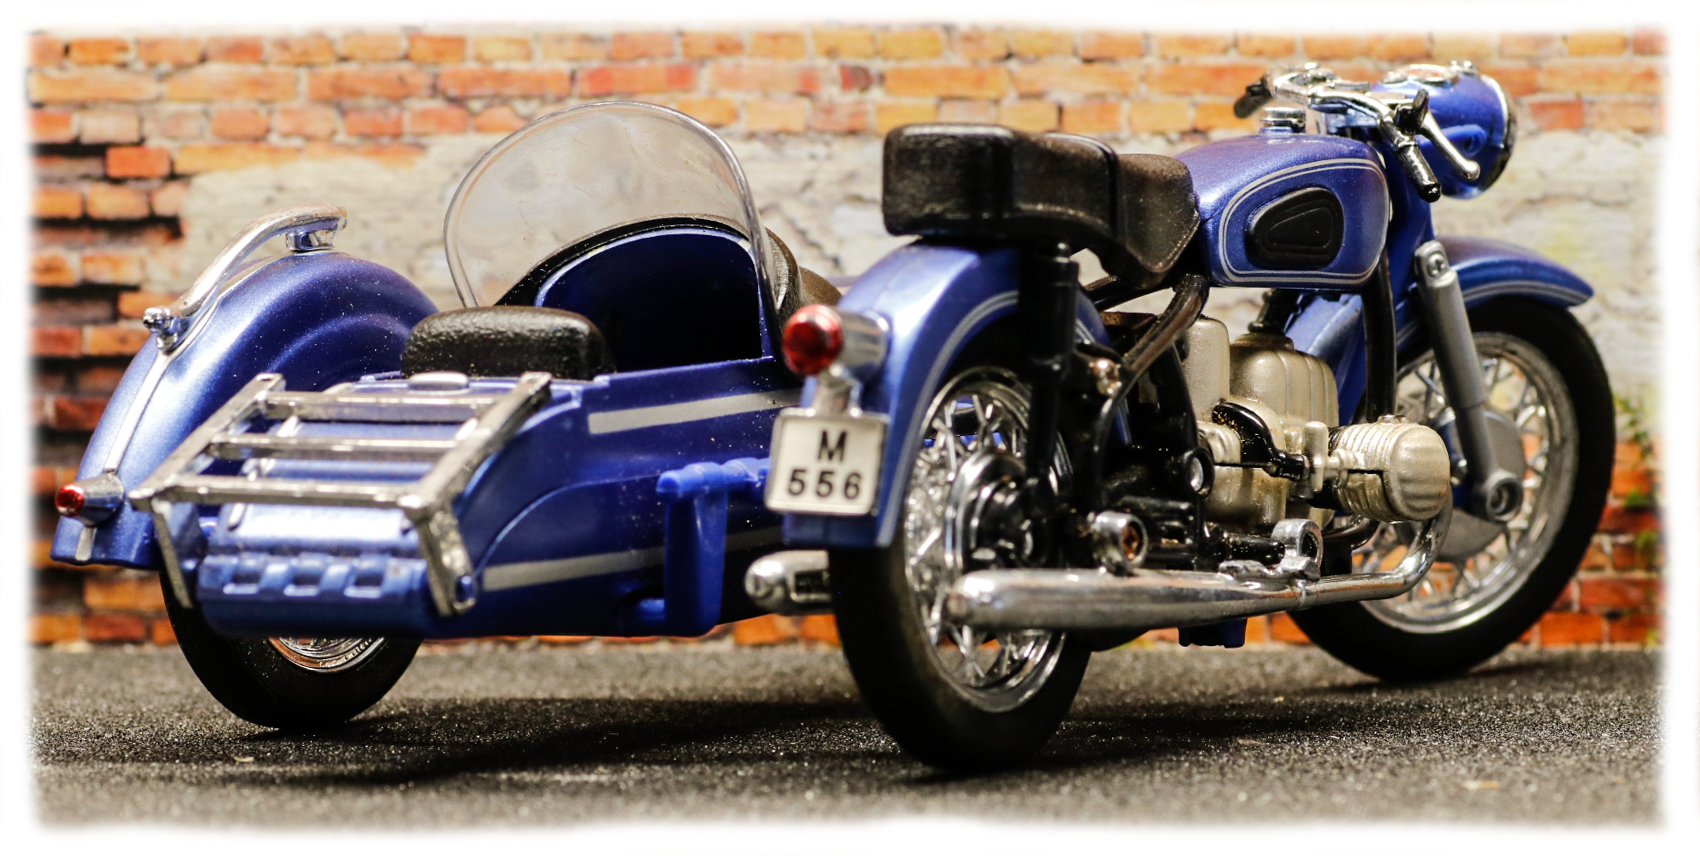 Sidecar Collection BMW R69s